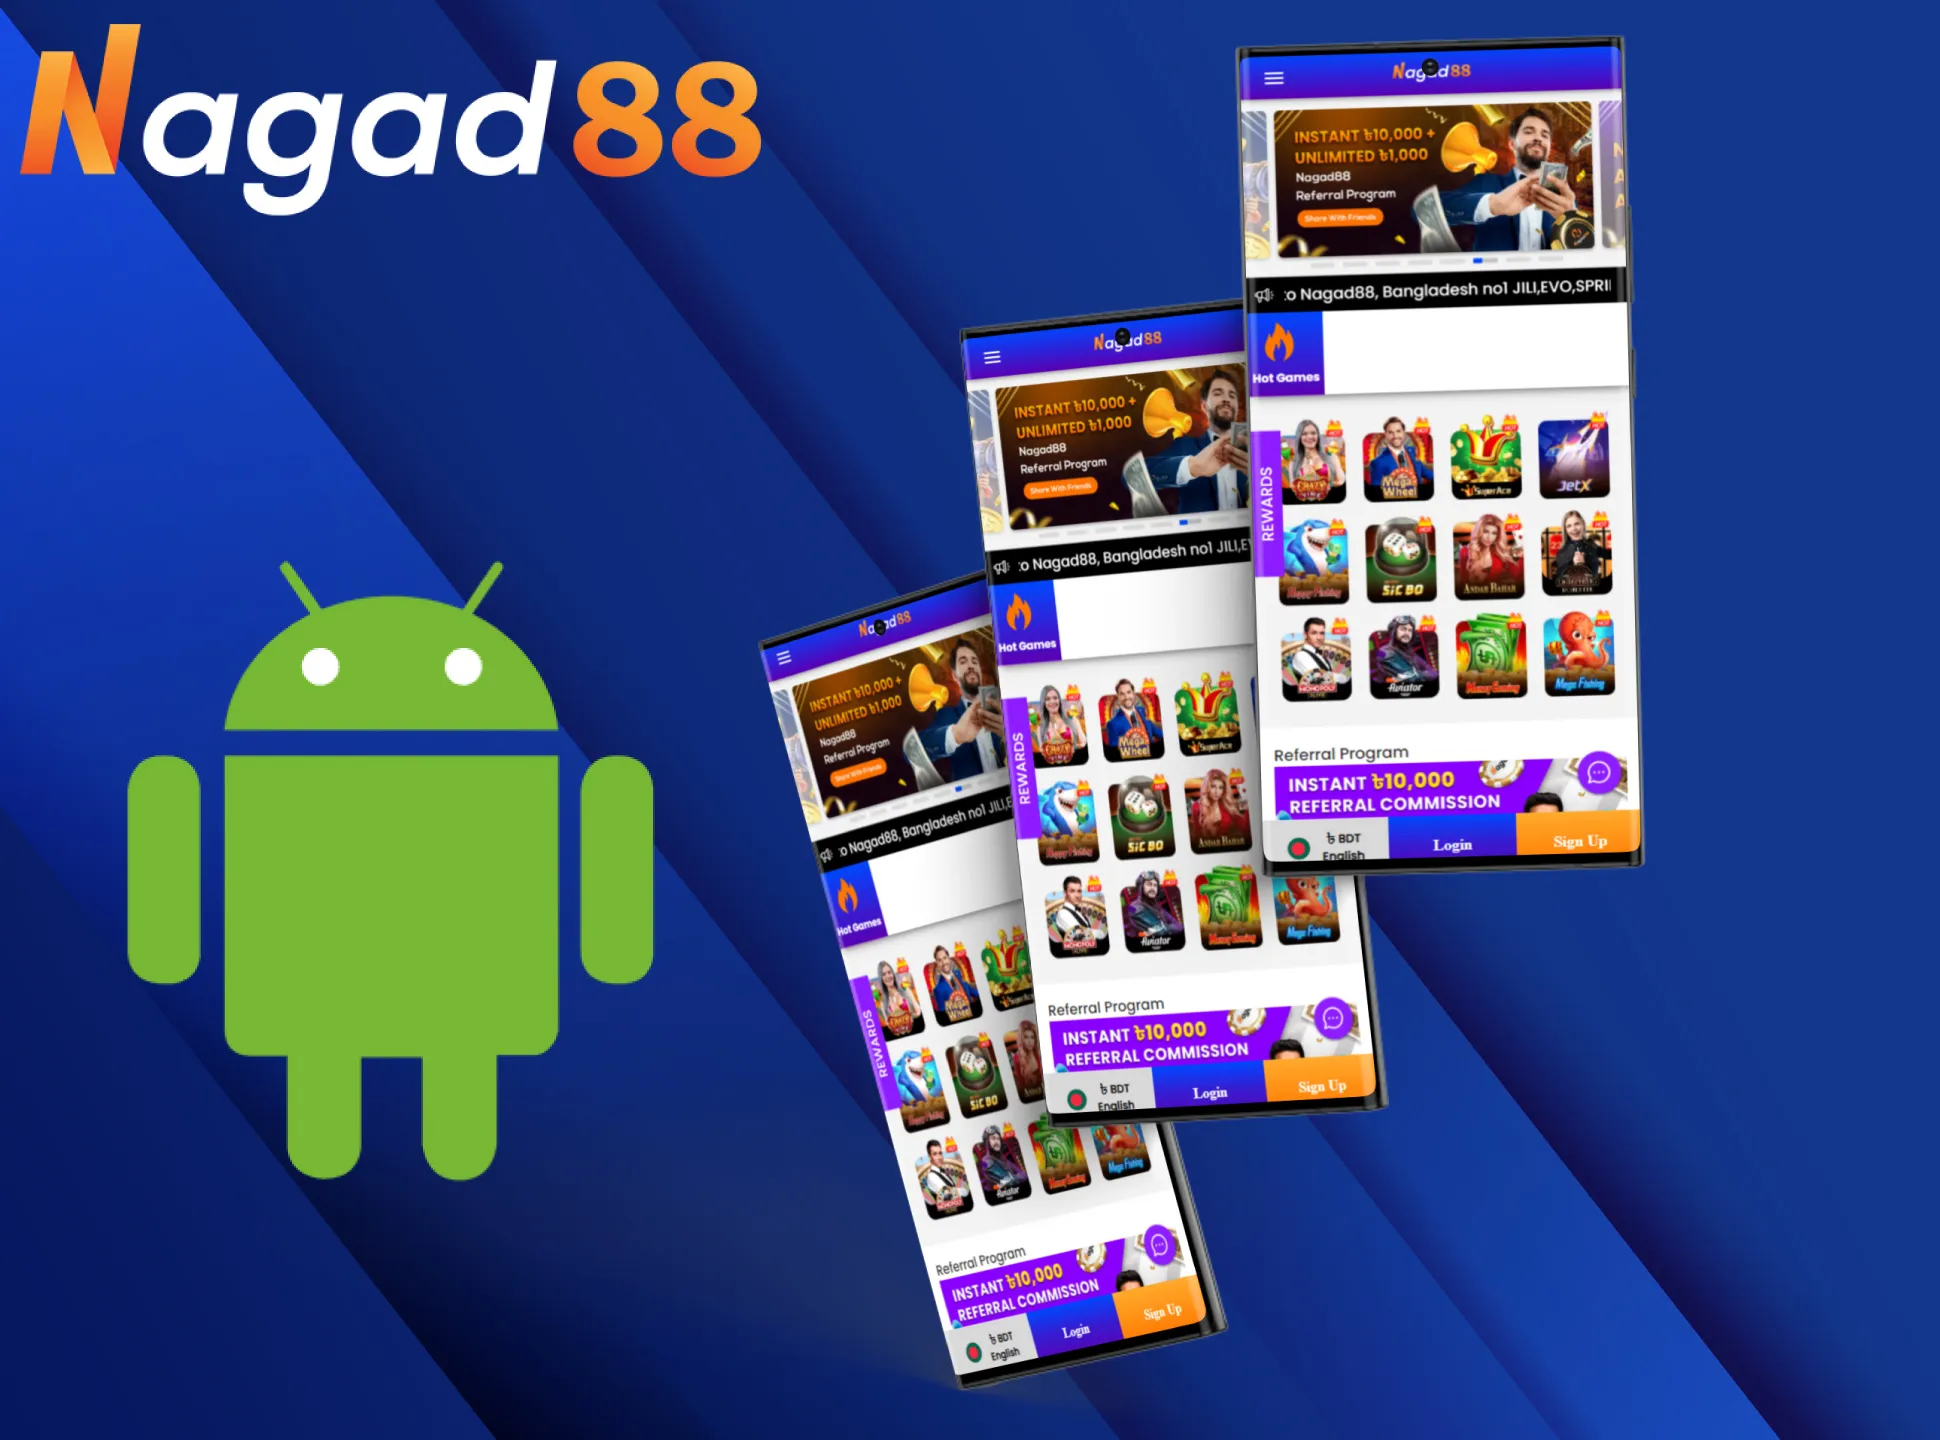 Install the Nagad88 app on various modern devices.